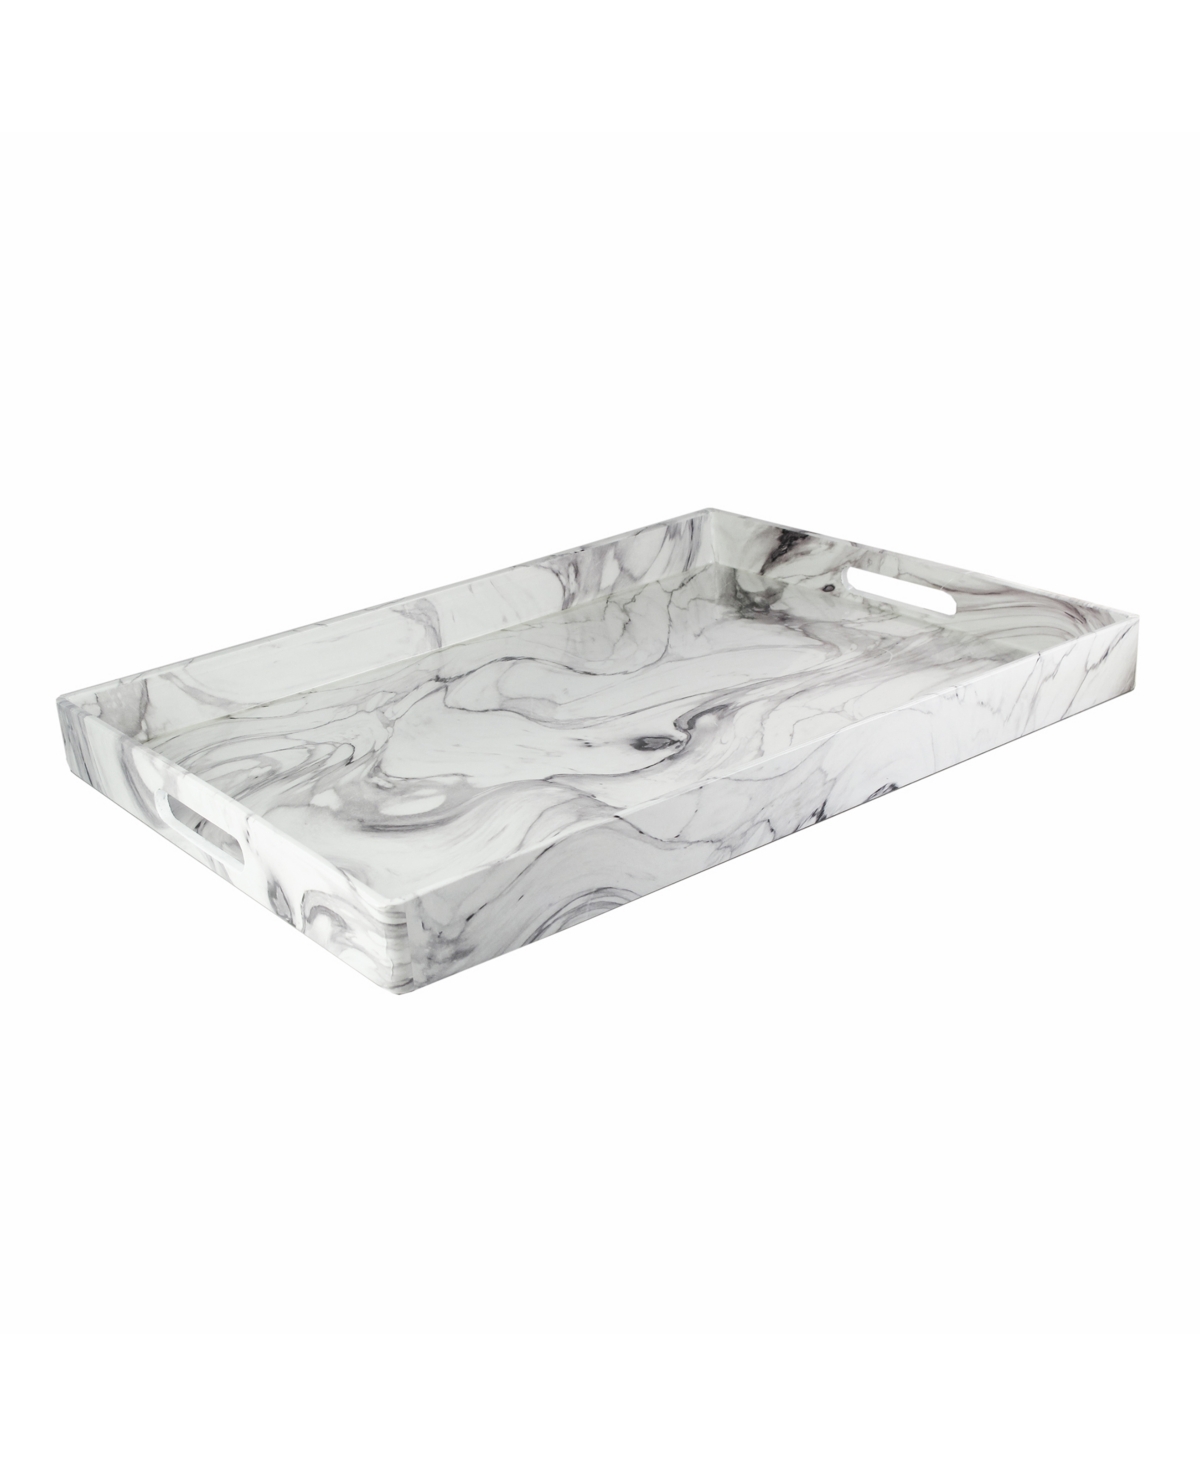 AMERICAN ATELIER MARBLE SWIRL TRAY WITH HANDLESS, 14" X 19"